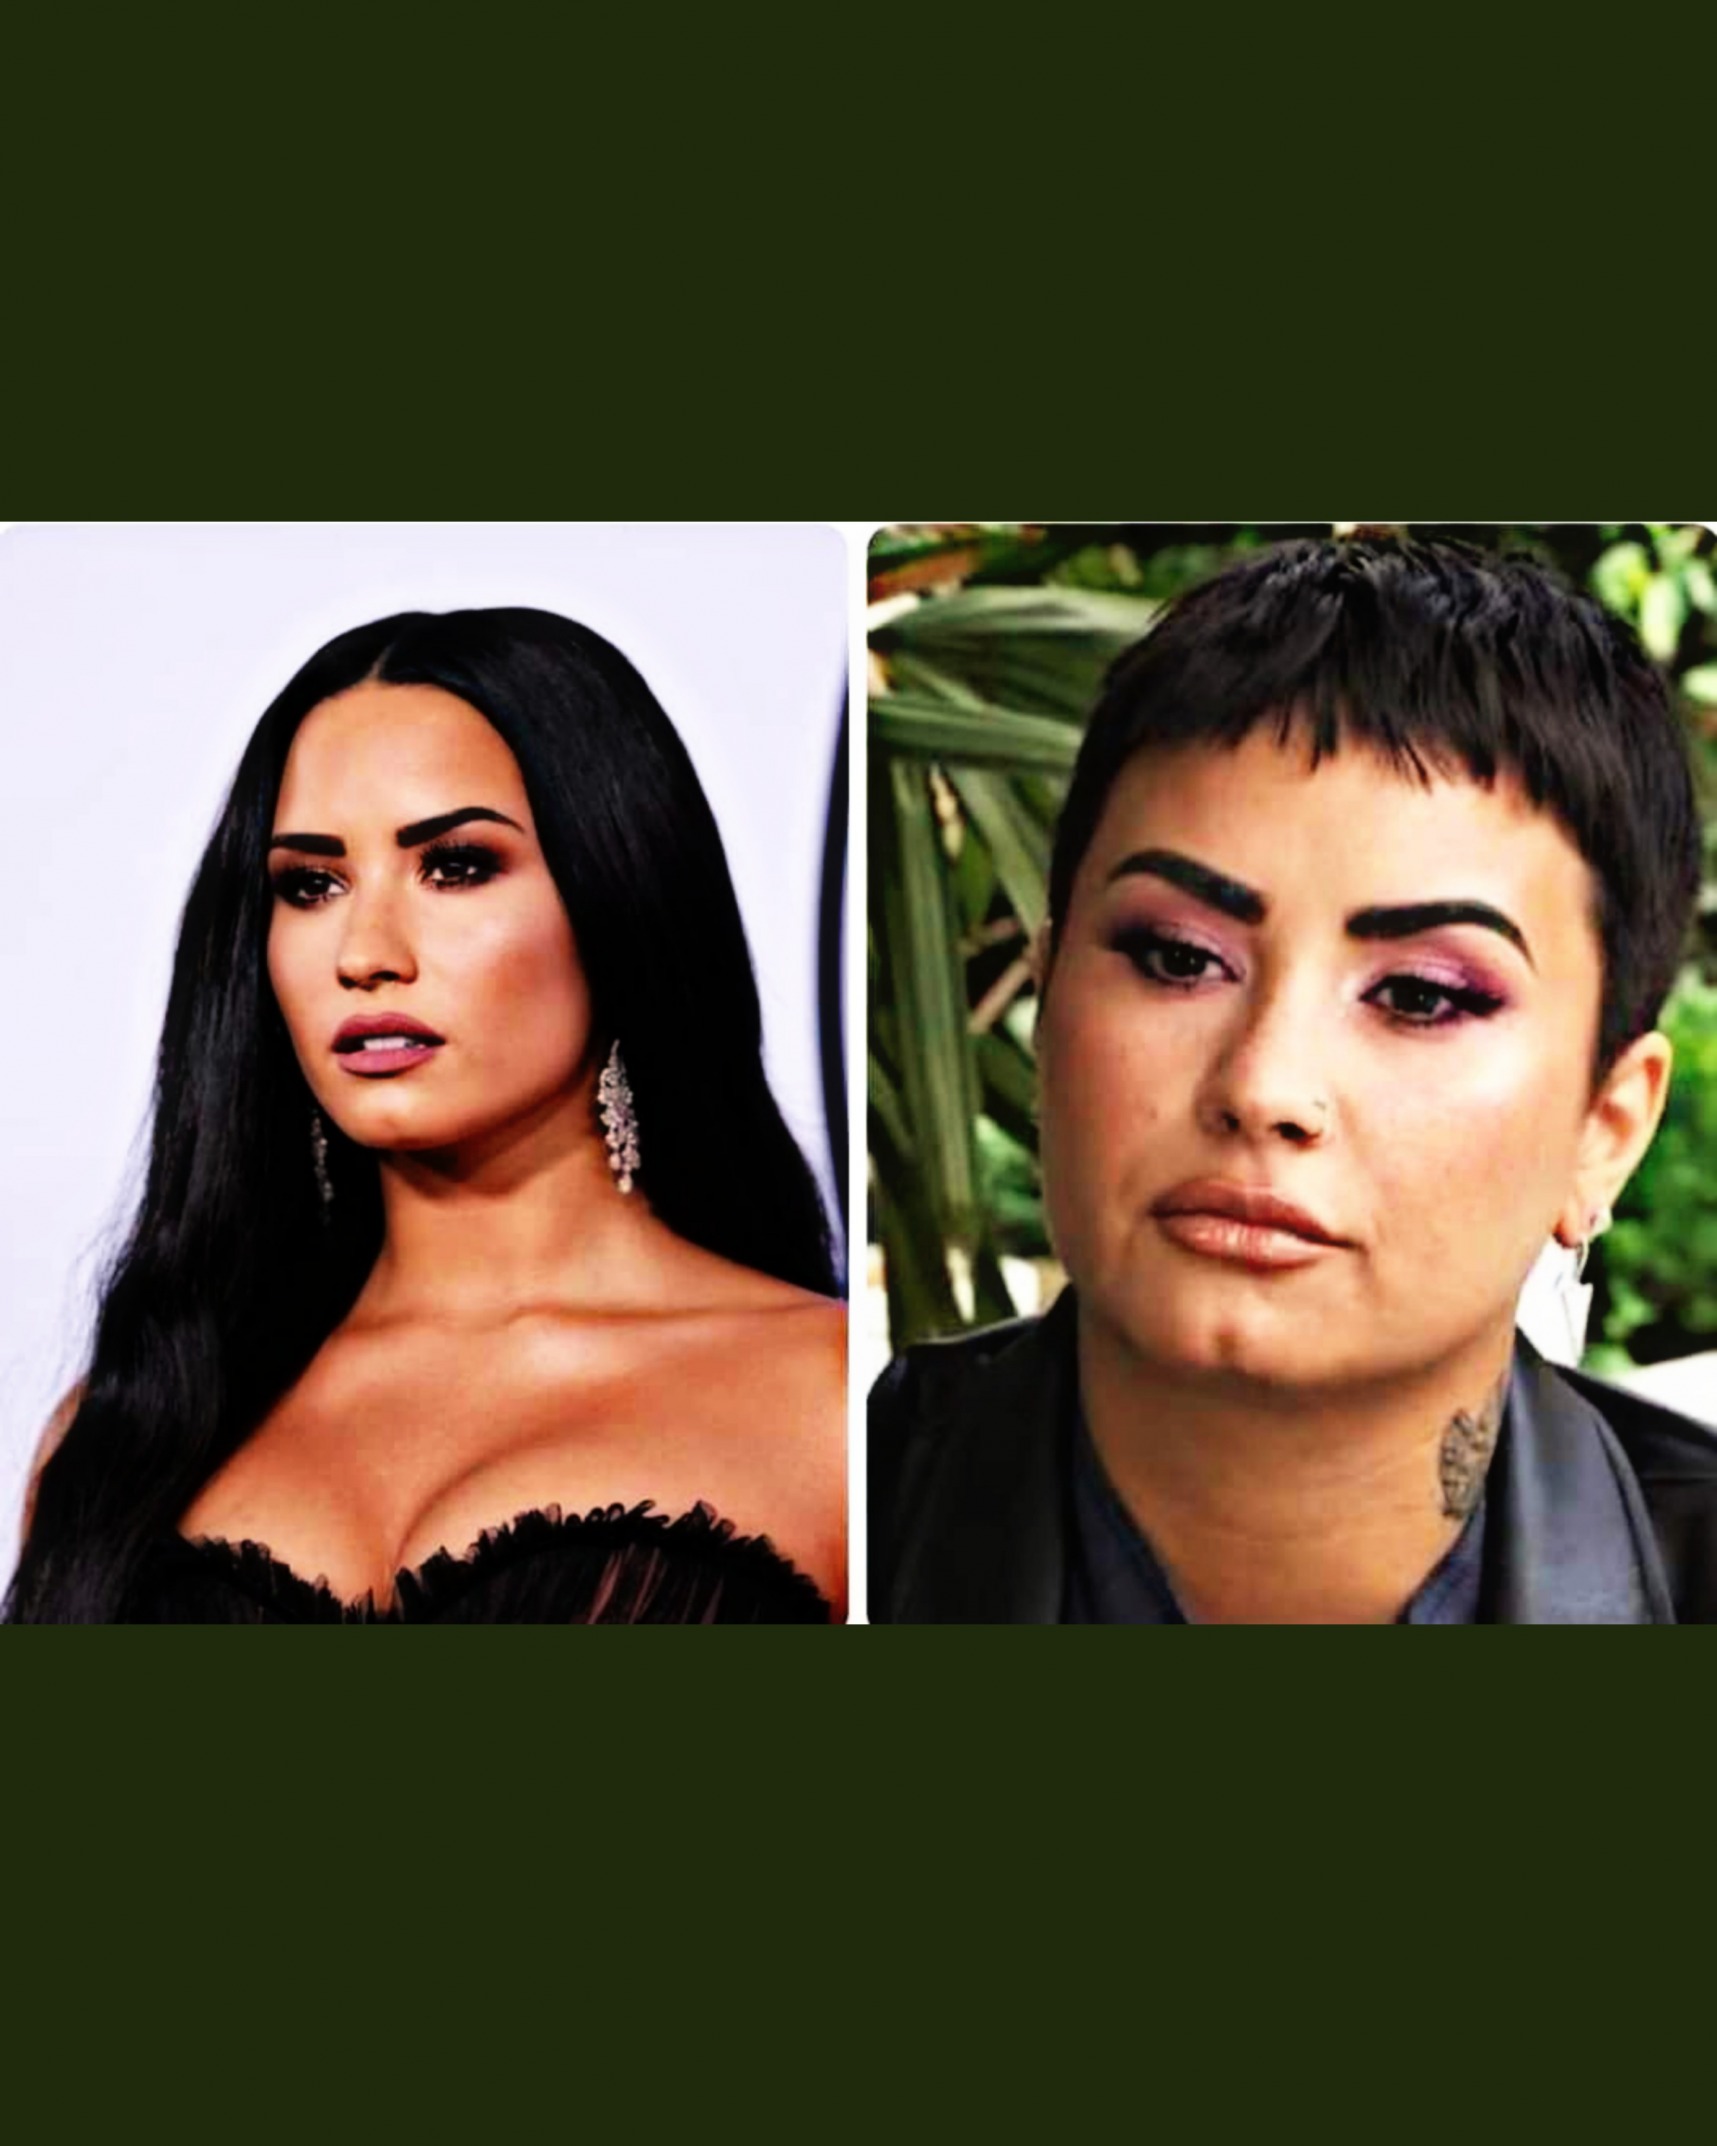 High Quality From Demi Lovato To Demi LaVato Blank Meme Template